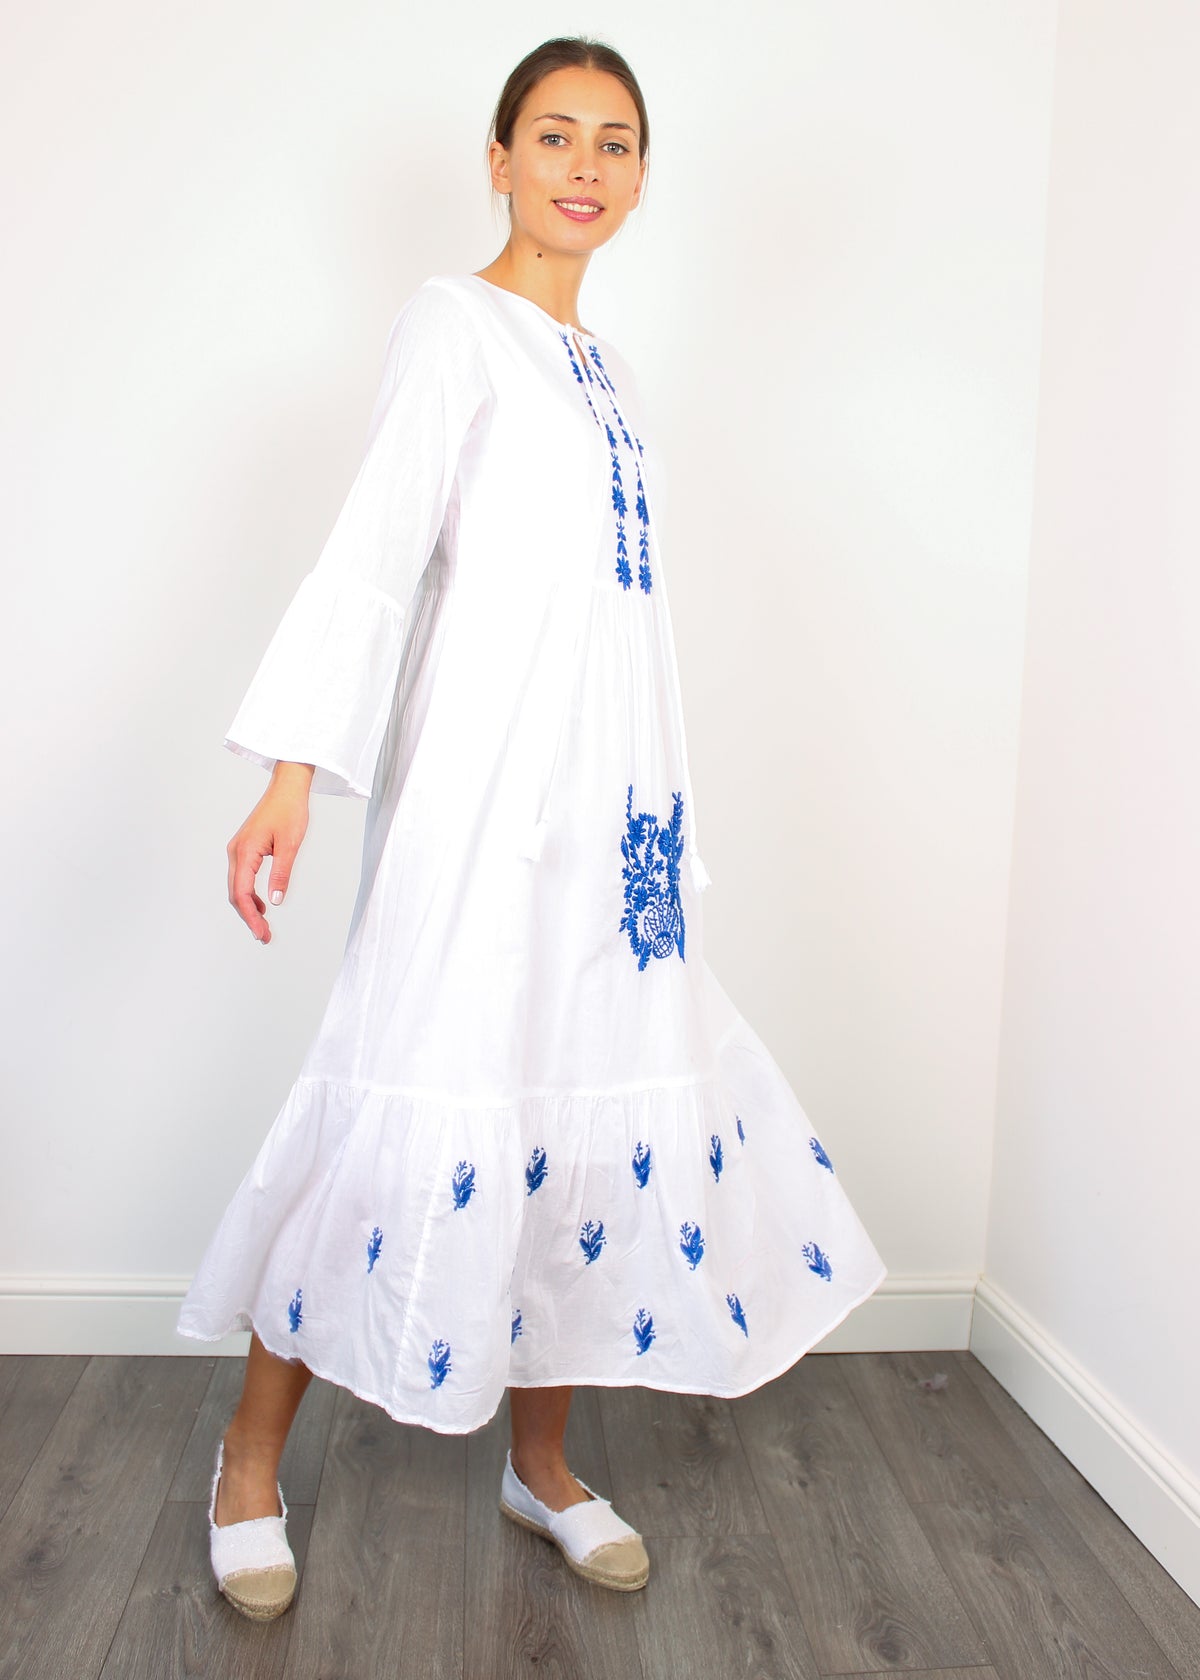 DREAM Dorothy dress in blue and white